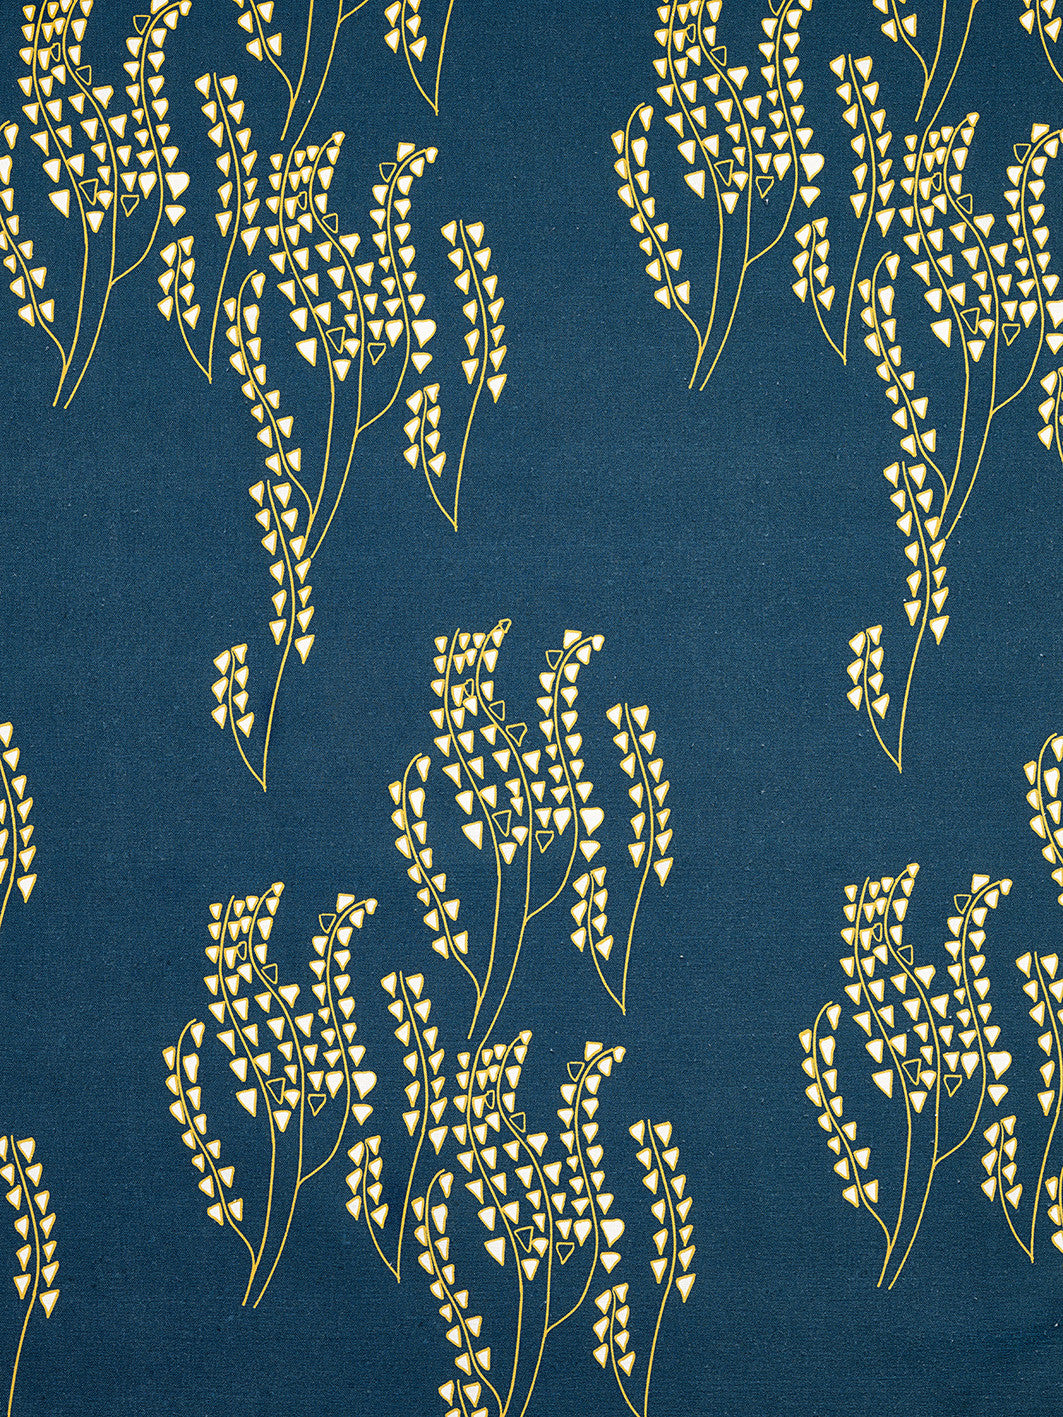 Yuma graphic Wild grass pattern cotton linen Home decor interior Fabric by the yard or meter for curtains, blinds or upholstery - Petrol navy dark blue - maize yellow ships from Canada (USA)